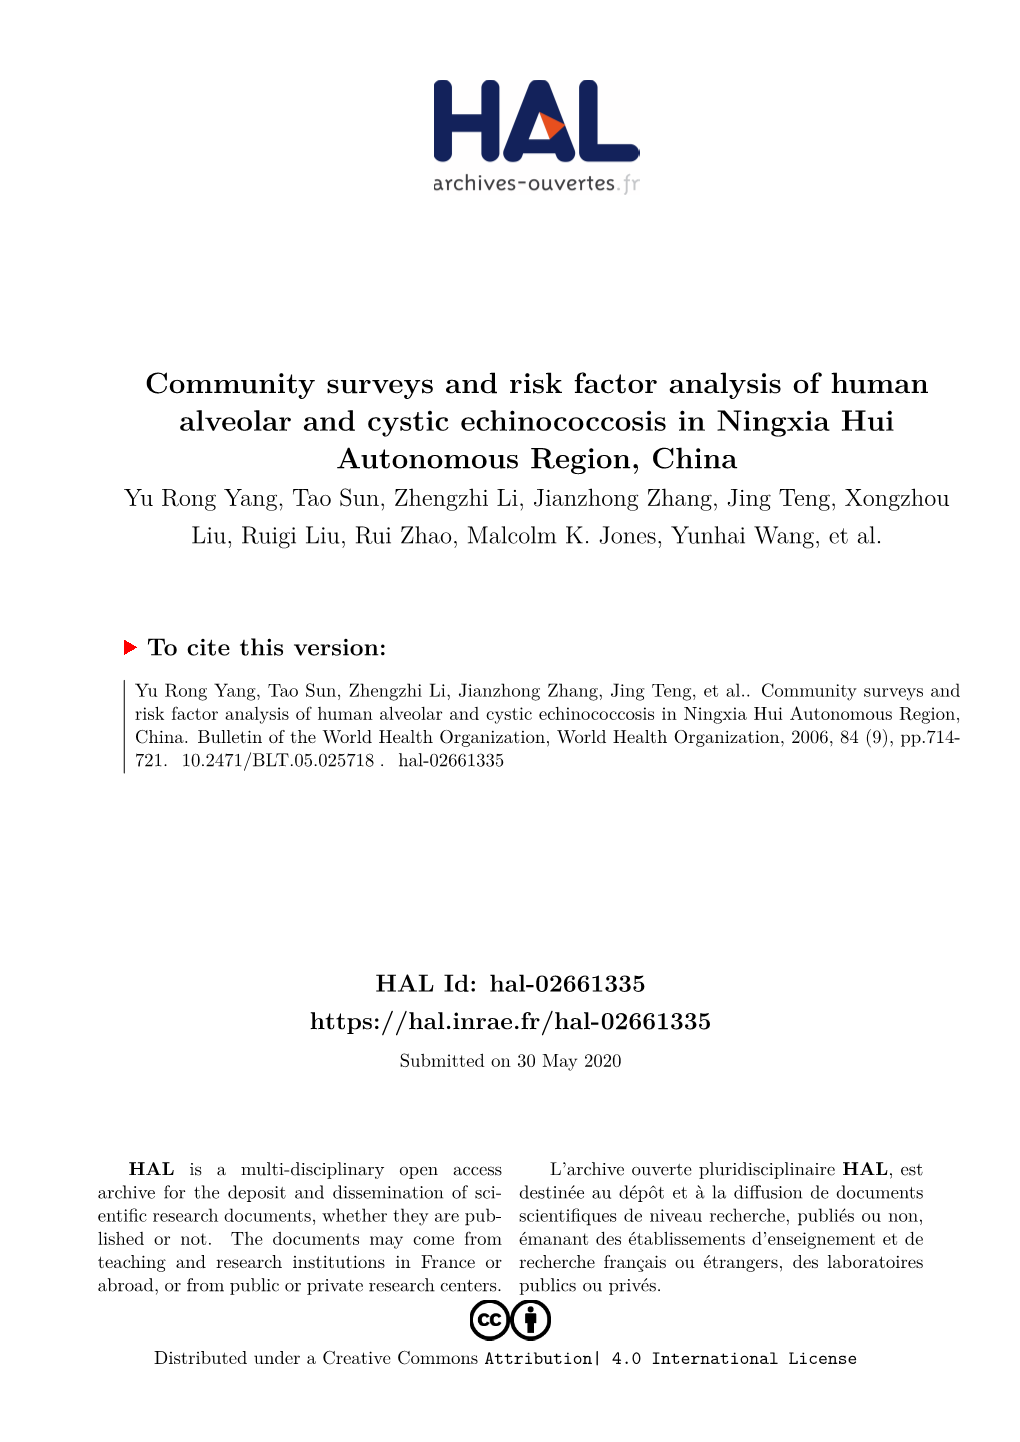 Community Surveys and Risk Factor Analysis of Human